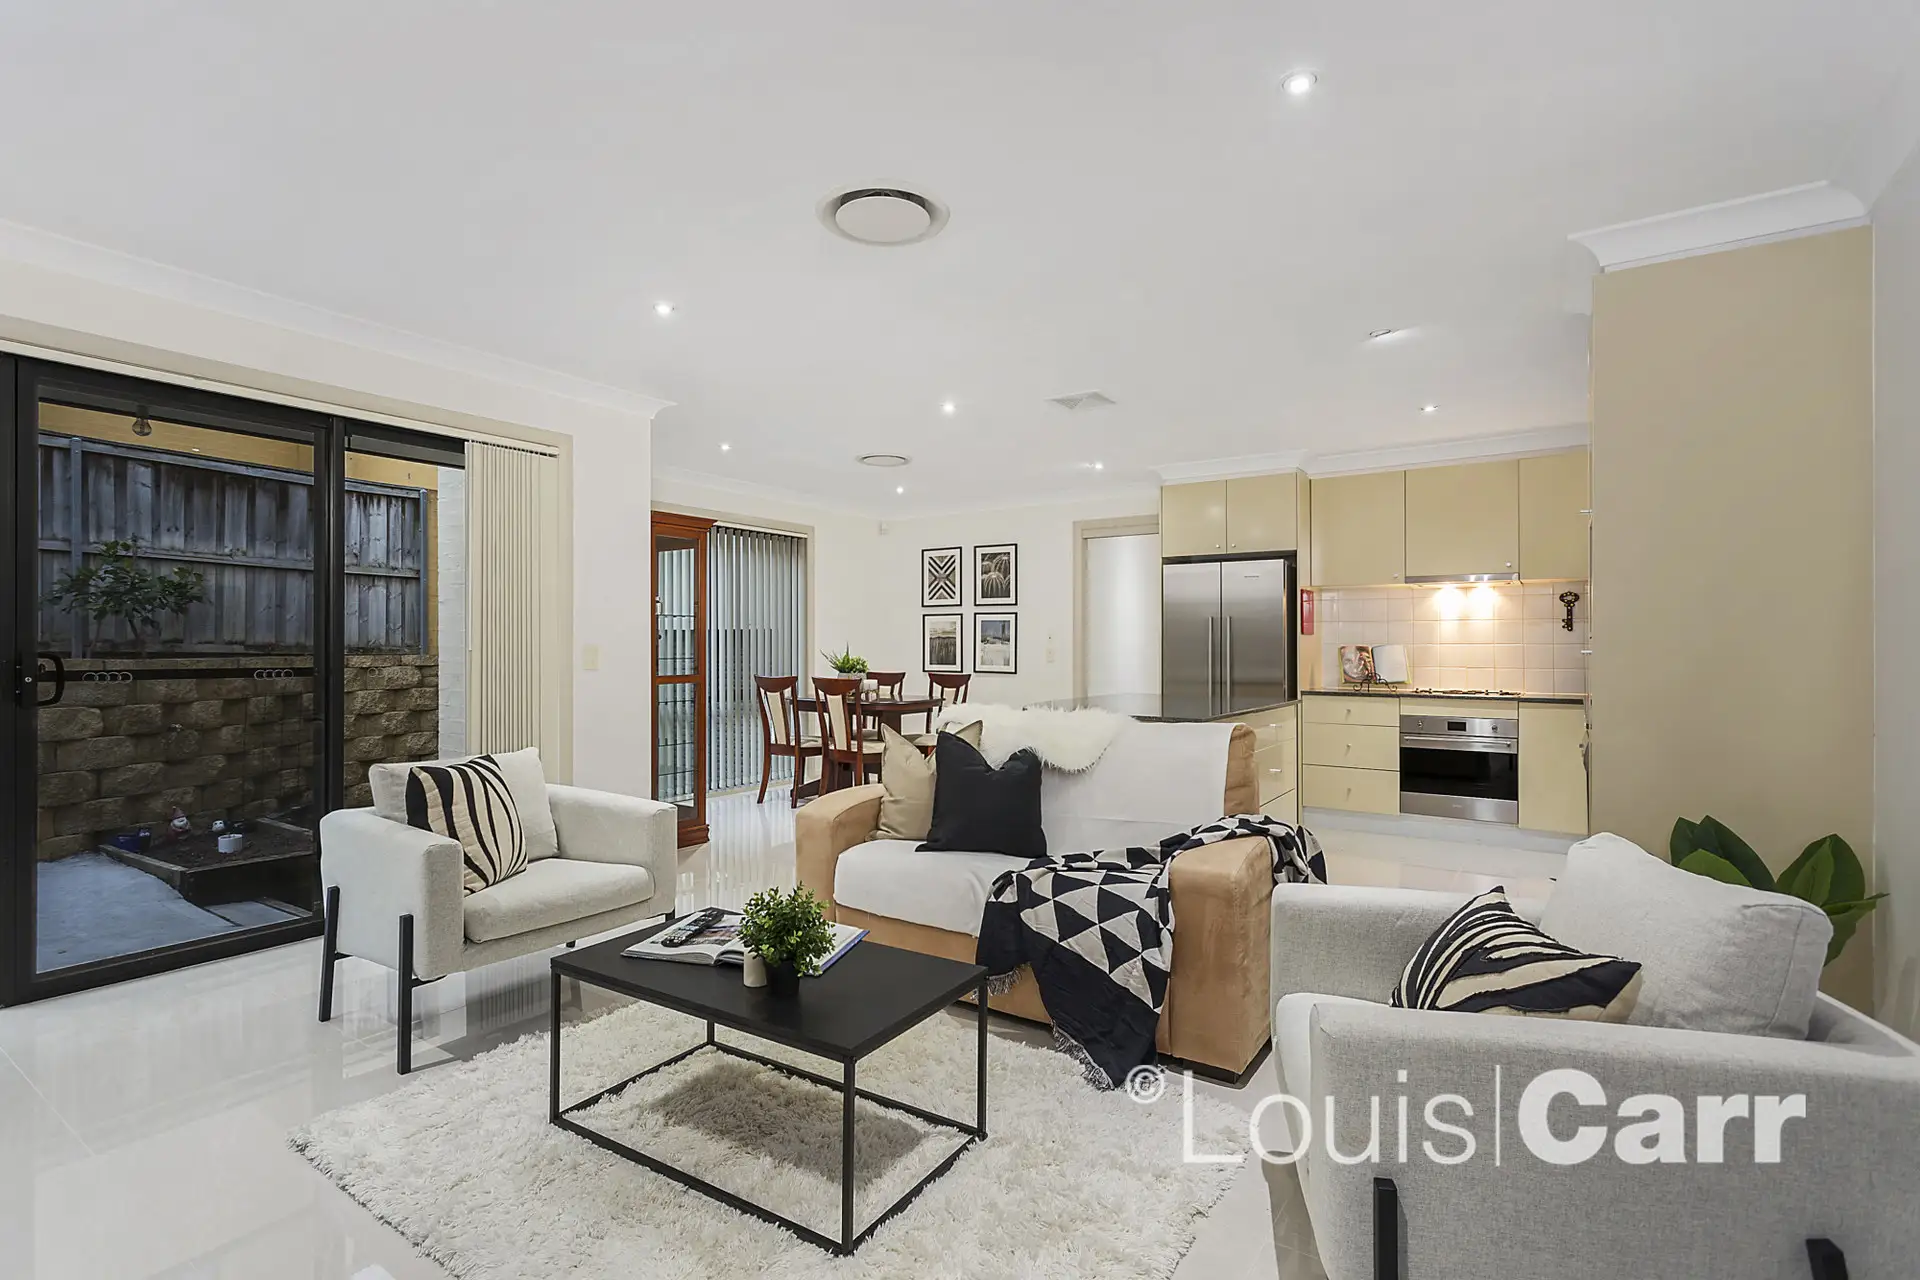 Photo #2: 23 Peartree Circuit, West Pennant Hills - Sold by Louis Carr Real Estate